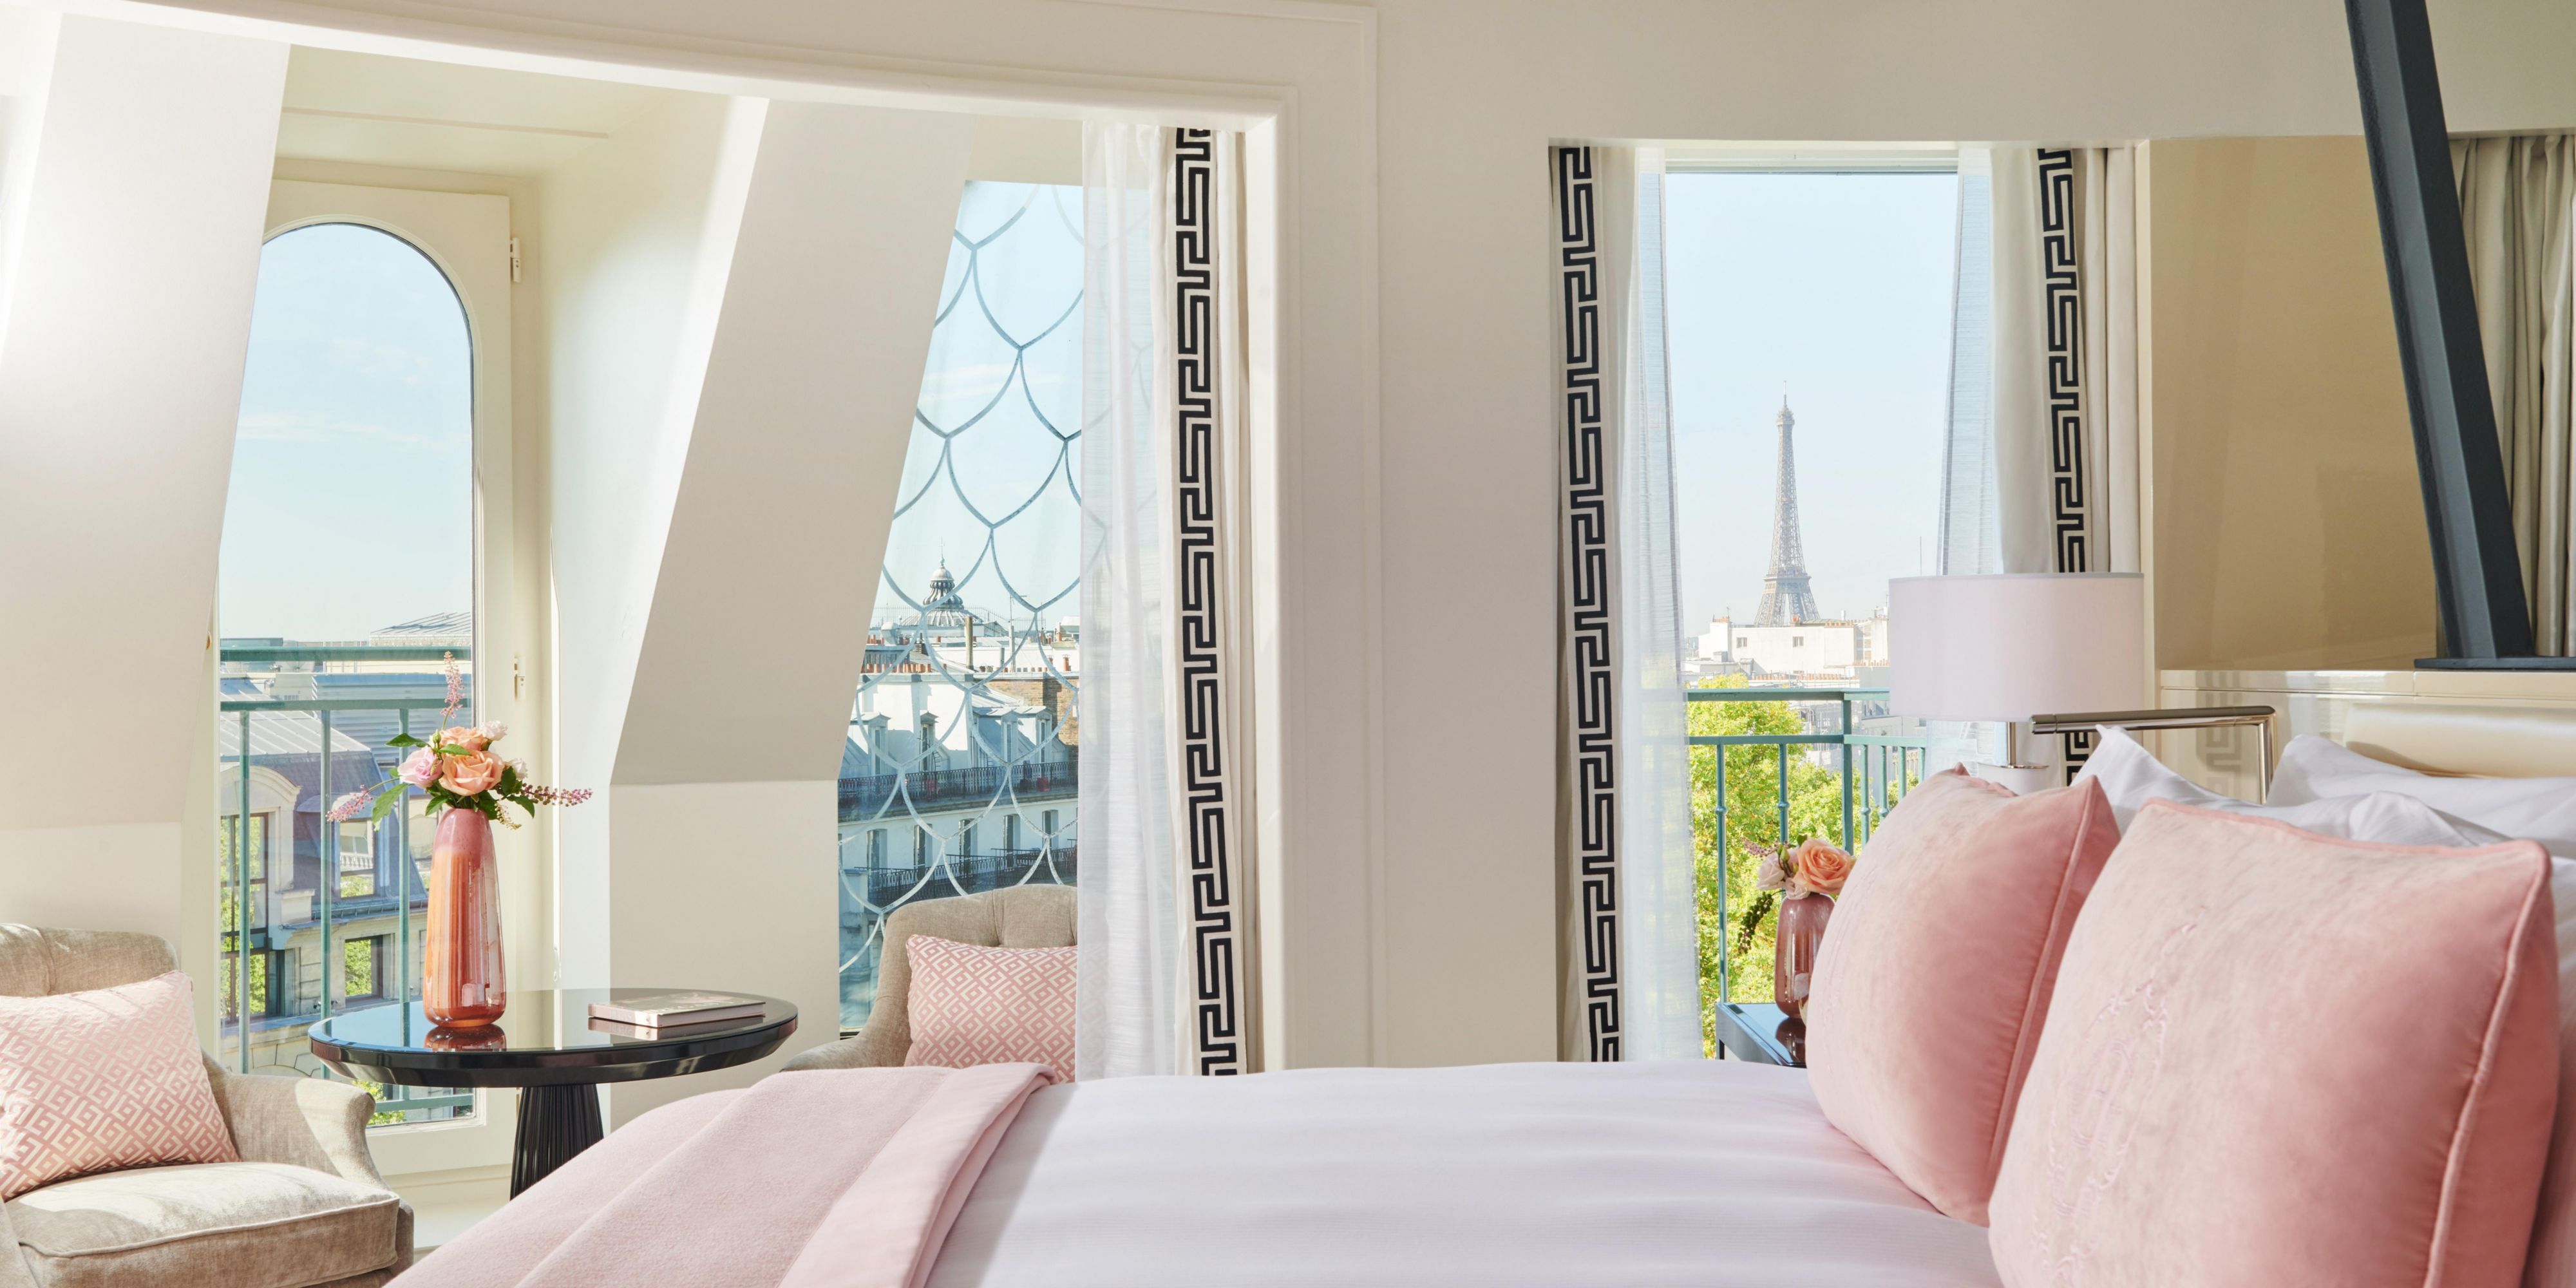 The Signature Suites are about cozy comfort and confidentiality, offering the ultimate luxury. With a breathtaking panoramic view over the roof of the Opera Garnier or the Eiffel tower, they are a peaceful haven with a chic contemporary feel.